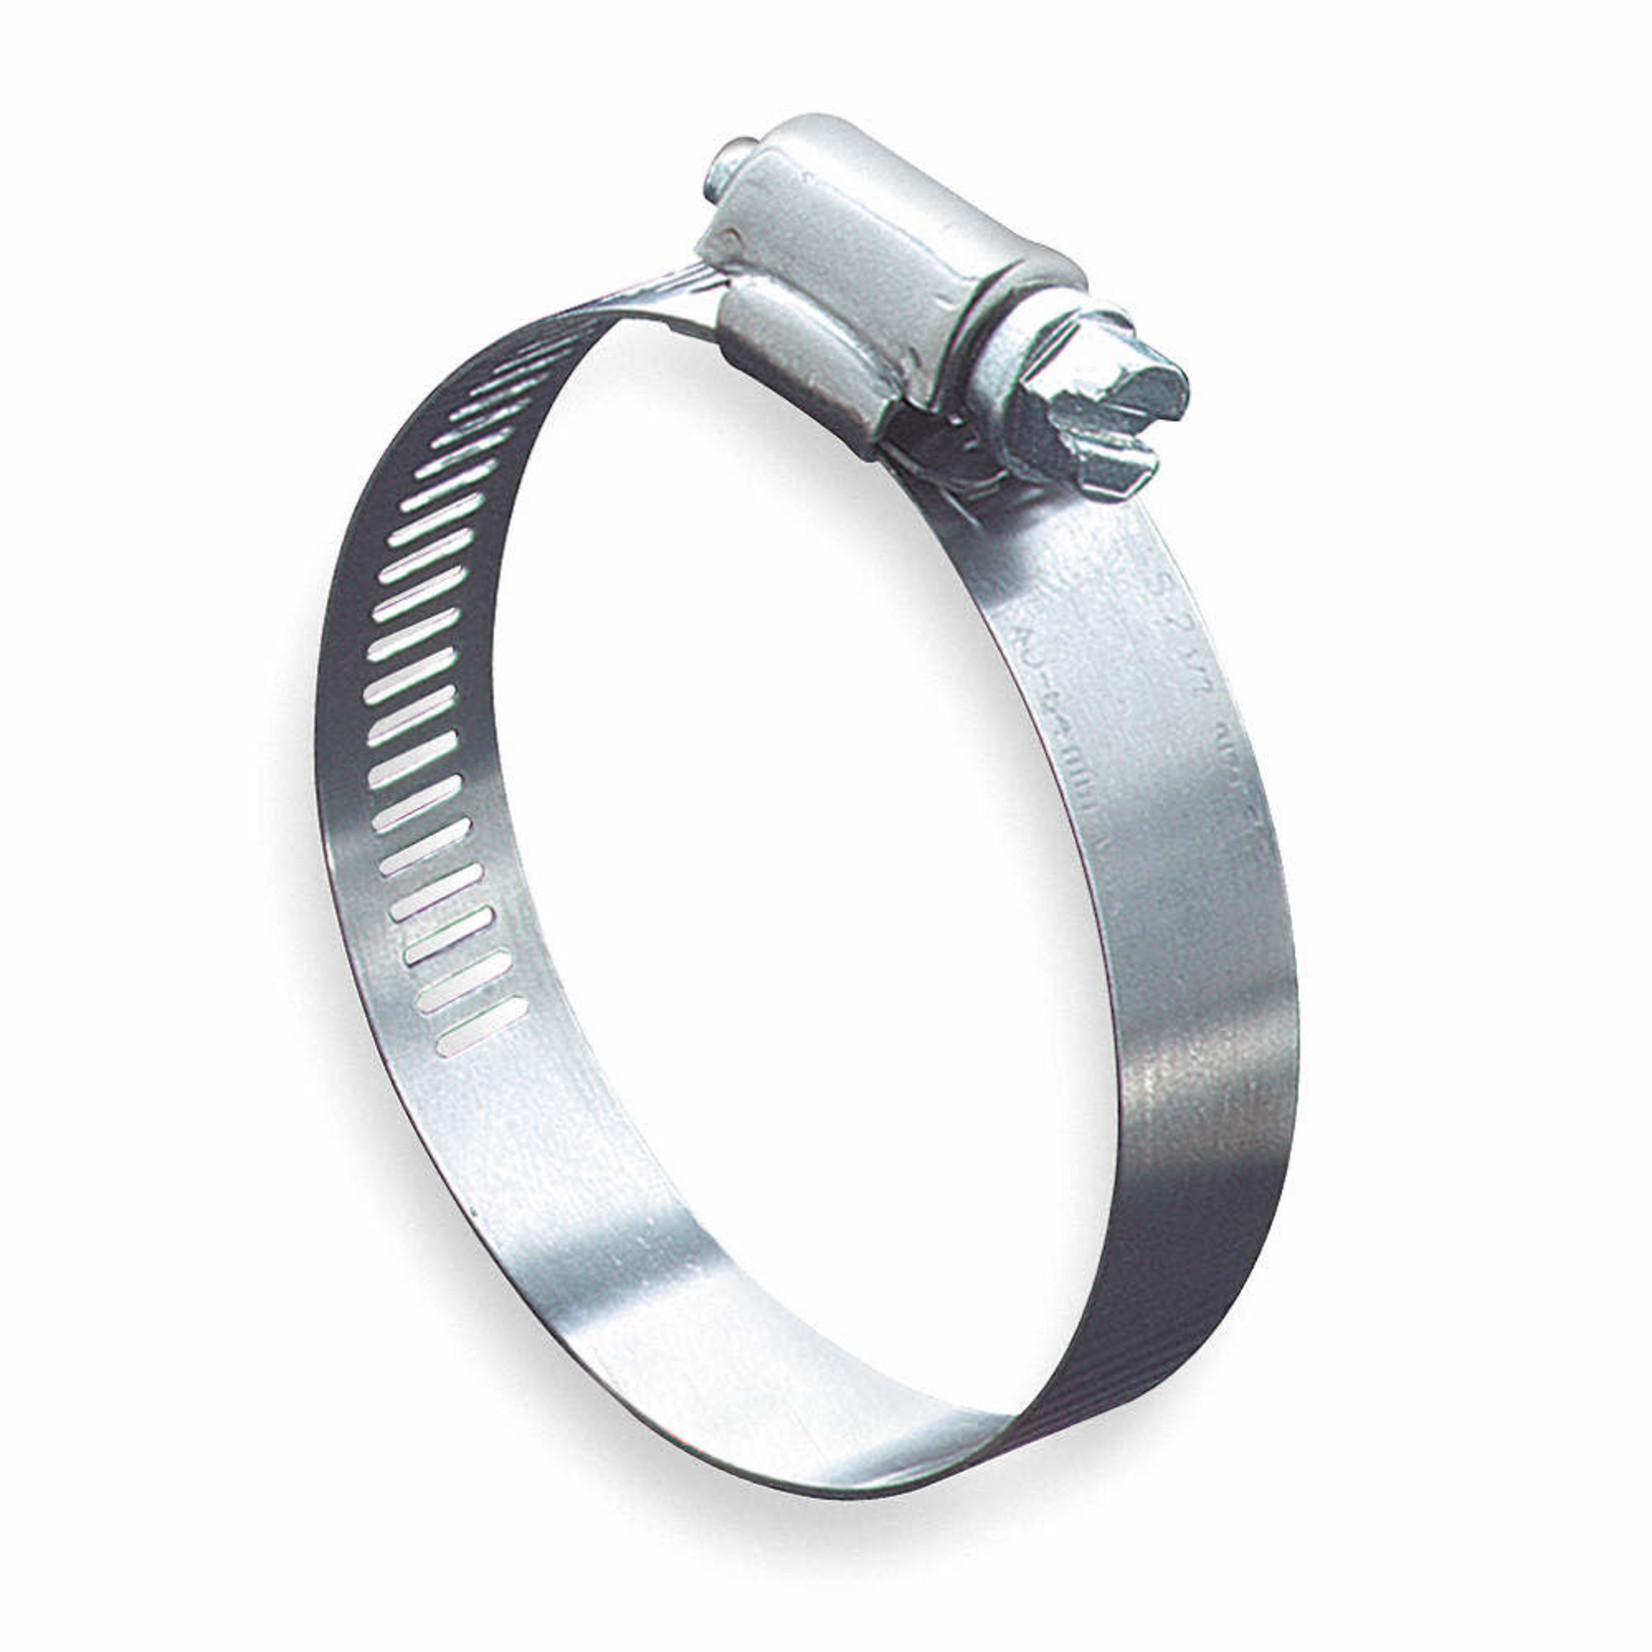 Waterline Stainless Steel Hose Clamp - 1in to 2in